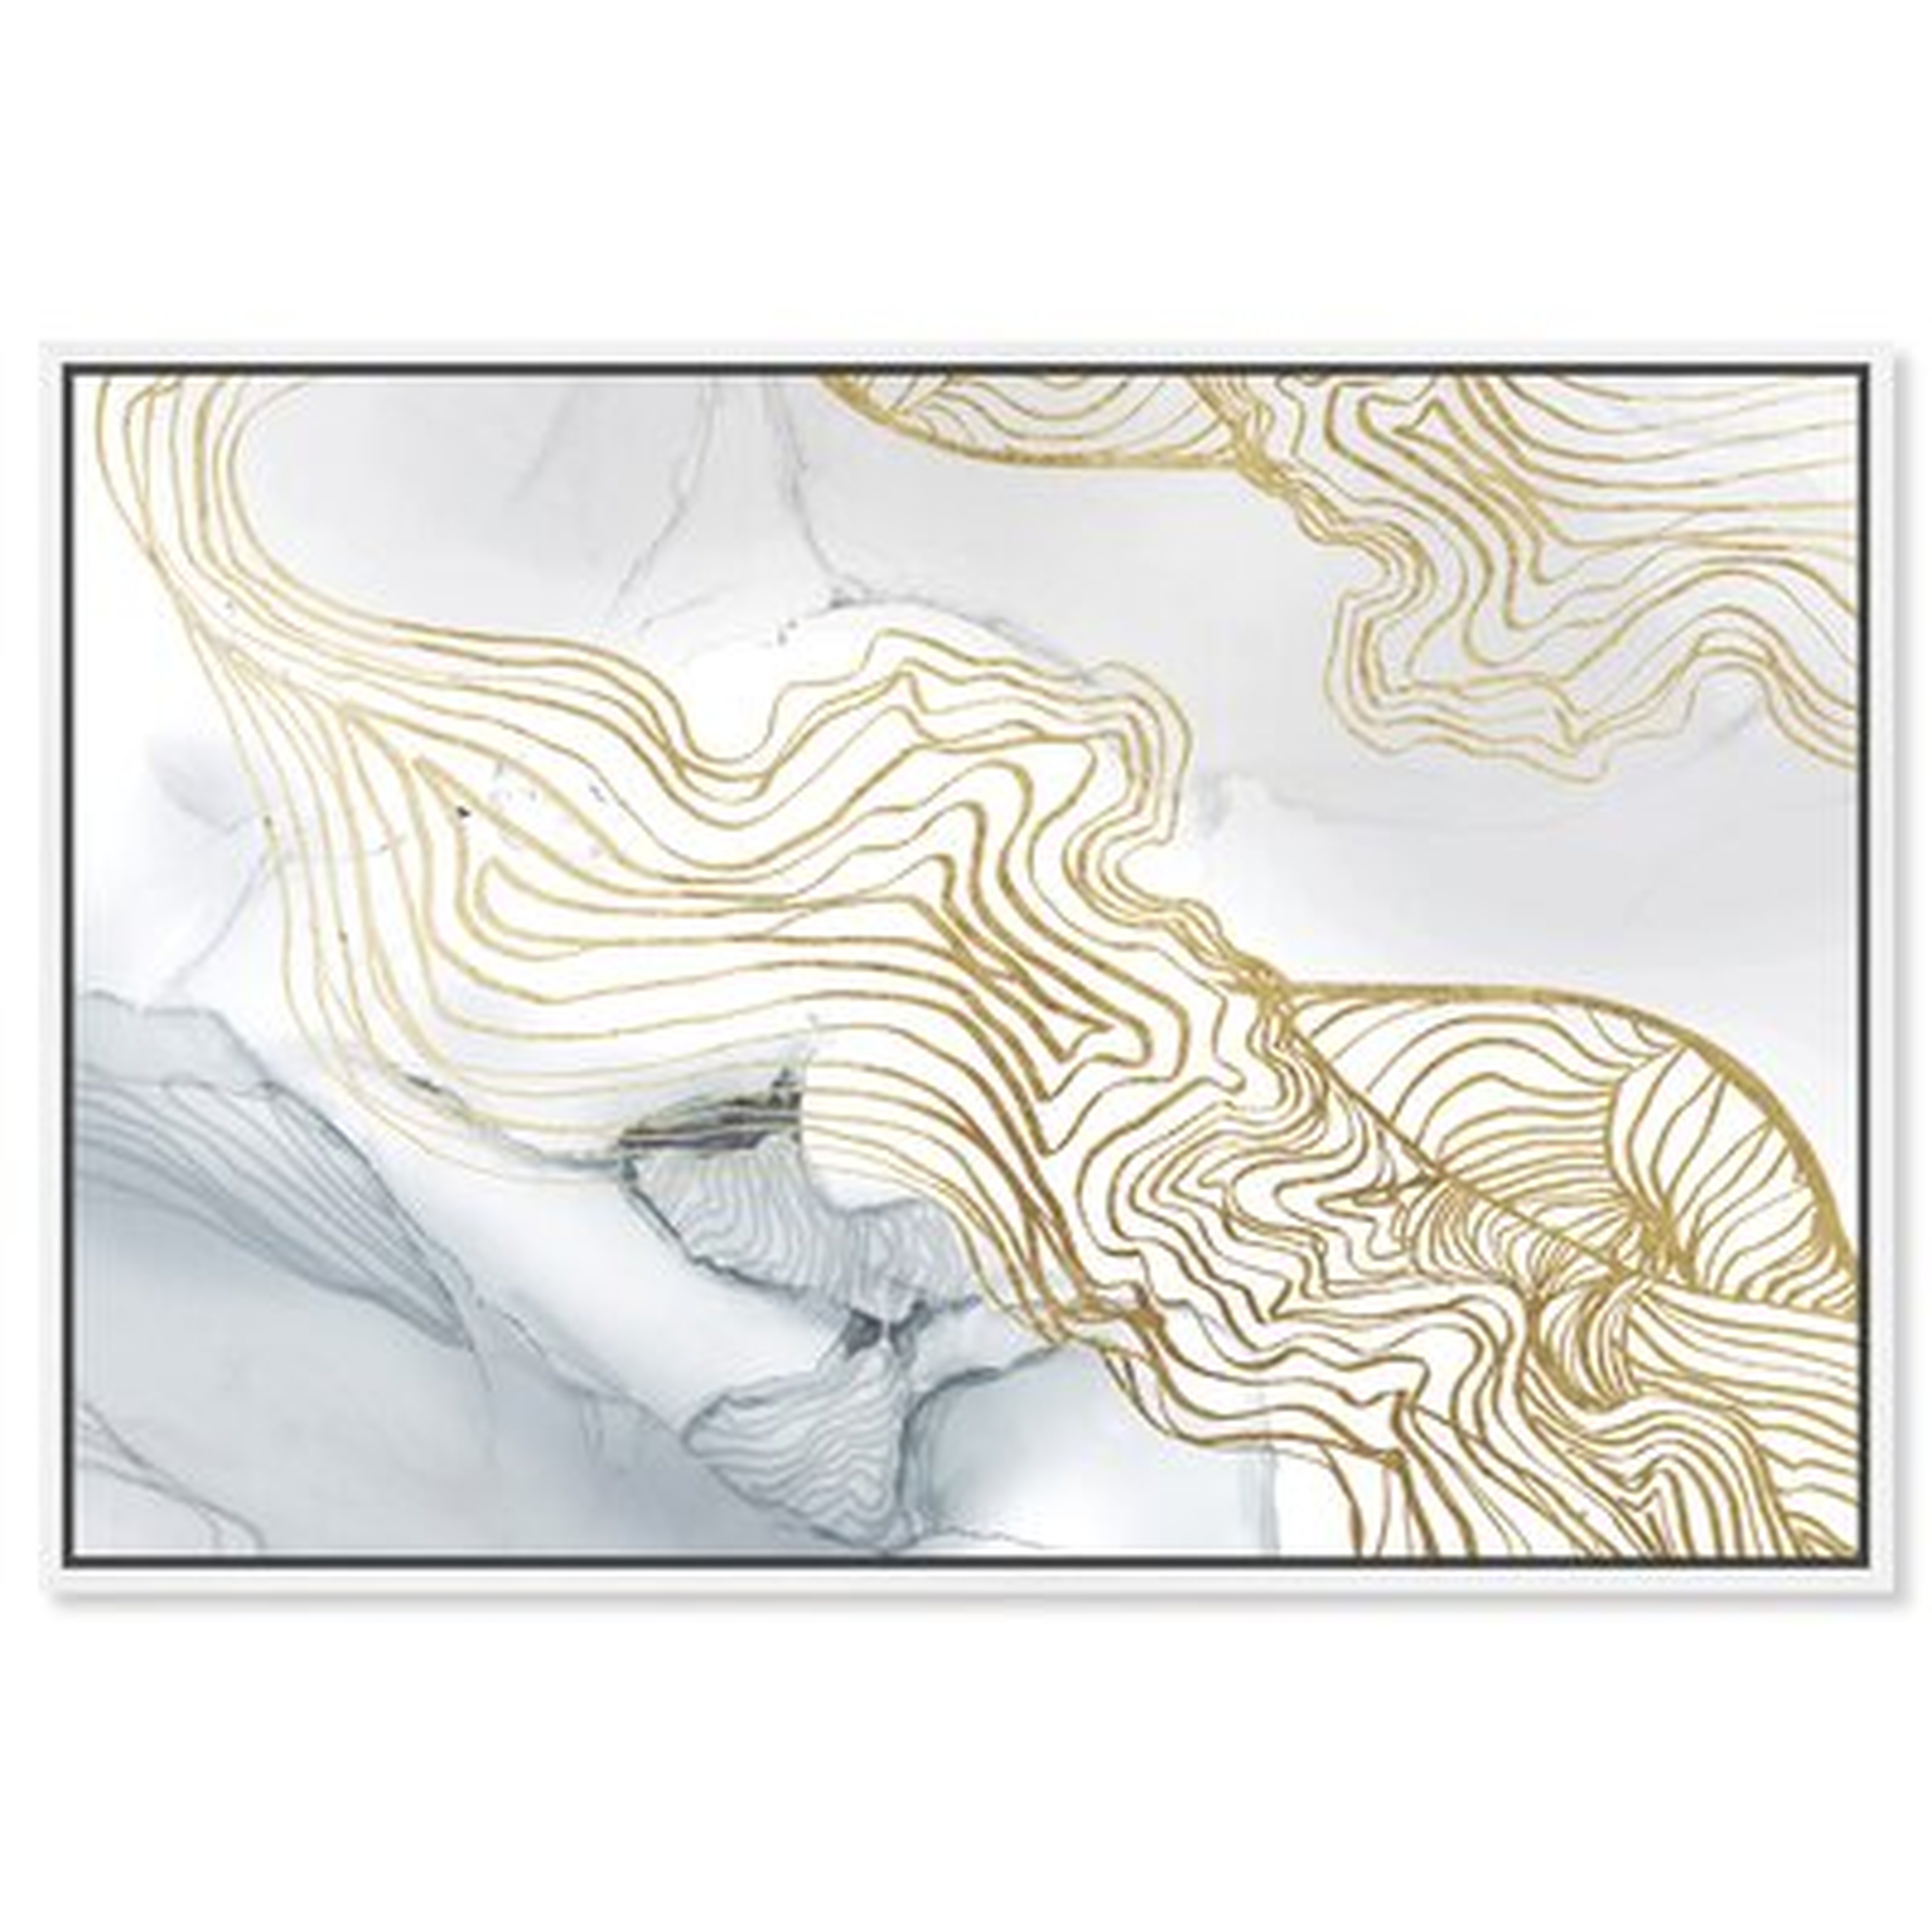 Abstract Sublime Perception Light Patterns - Graphic Art Print on Canvas - Wayfair